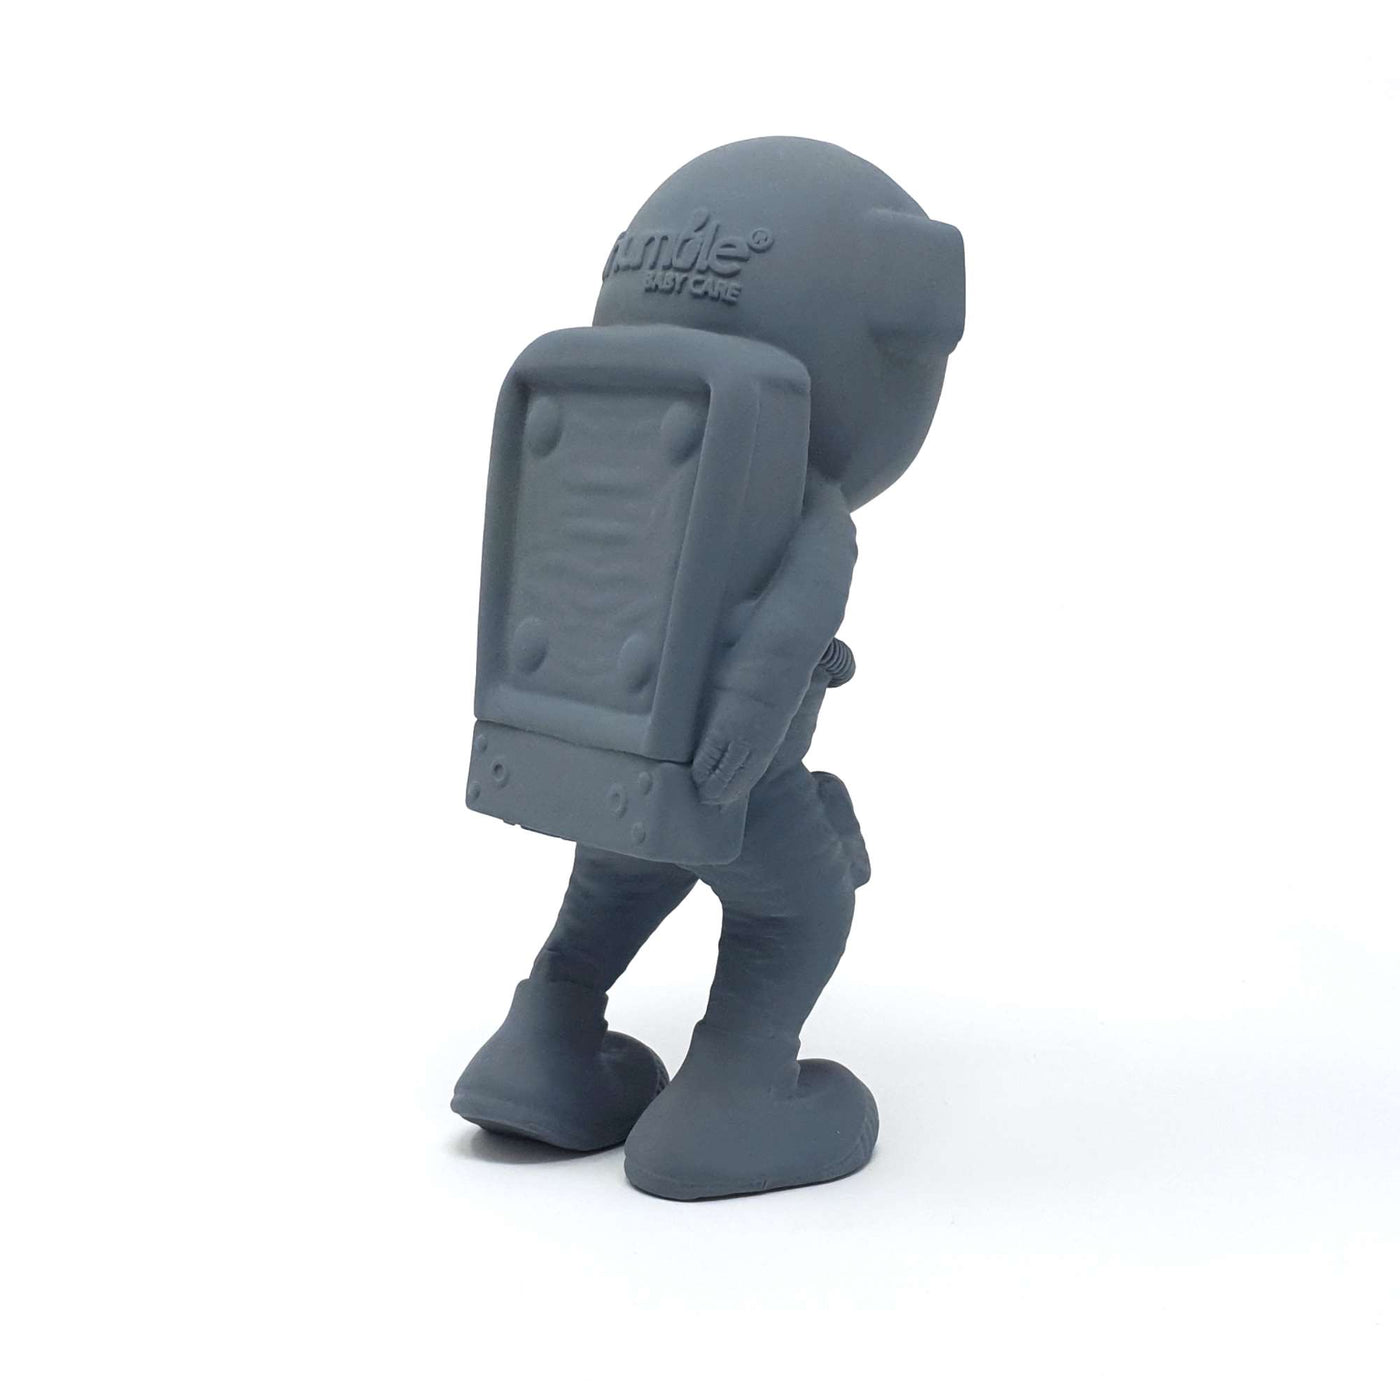 Highly detailed AstroGNAW astronanut shaped baby toy with backpack and lunar boots in grey